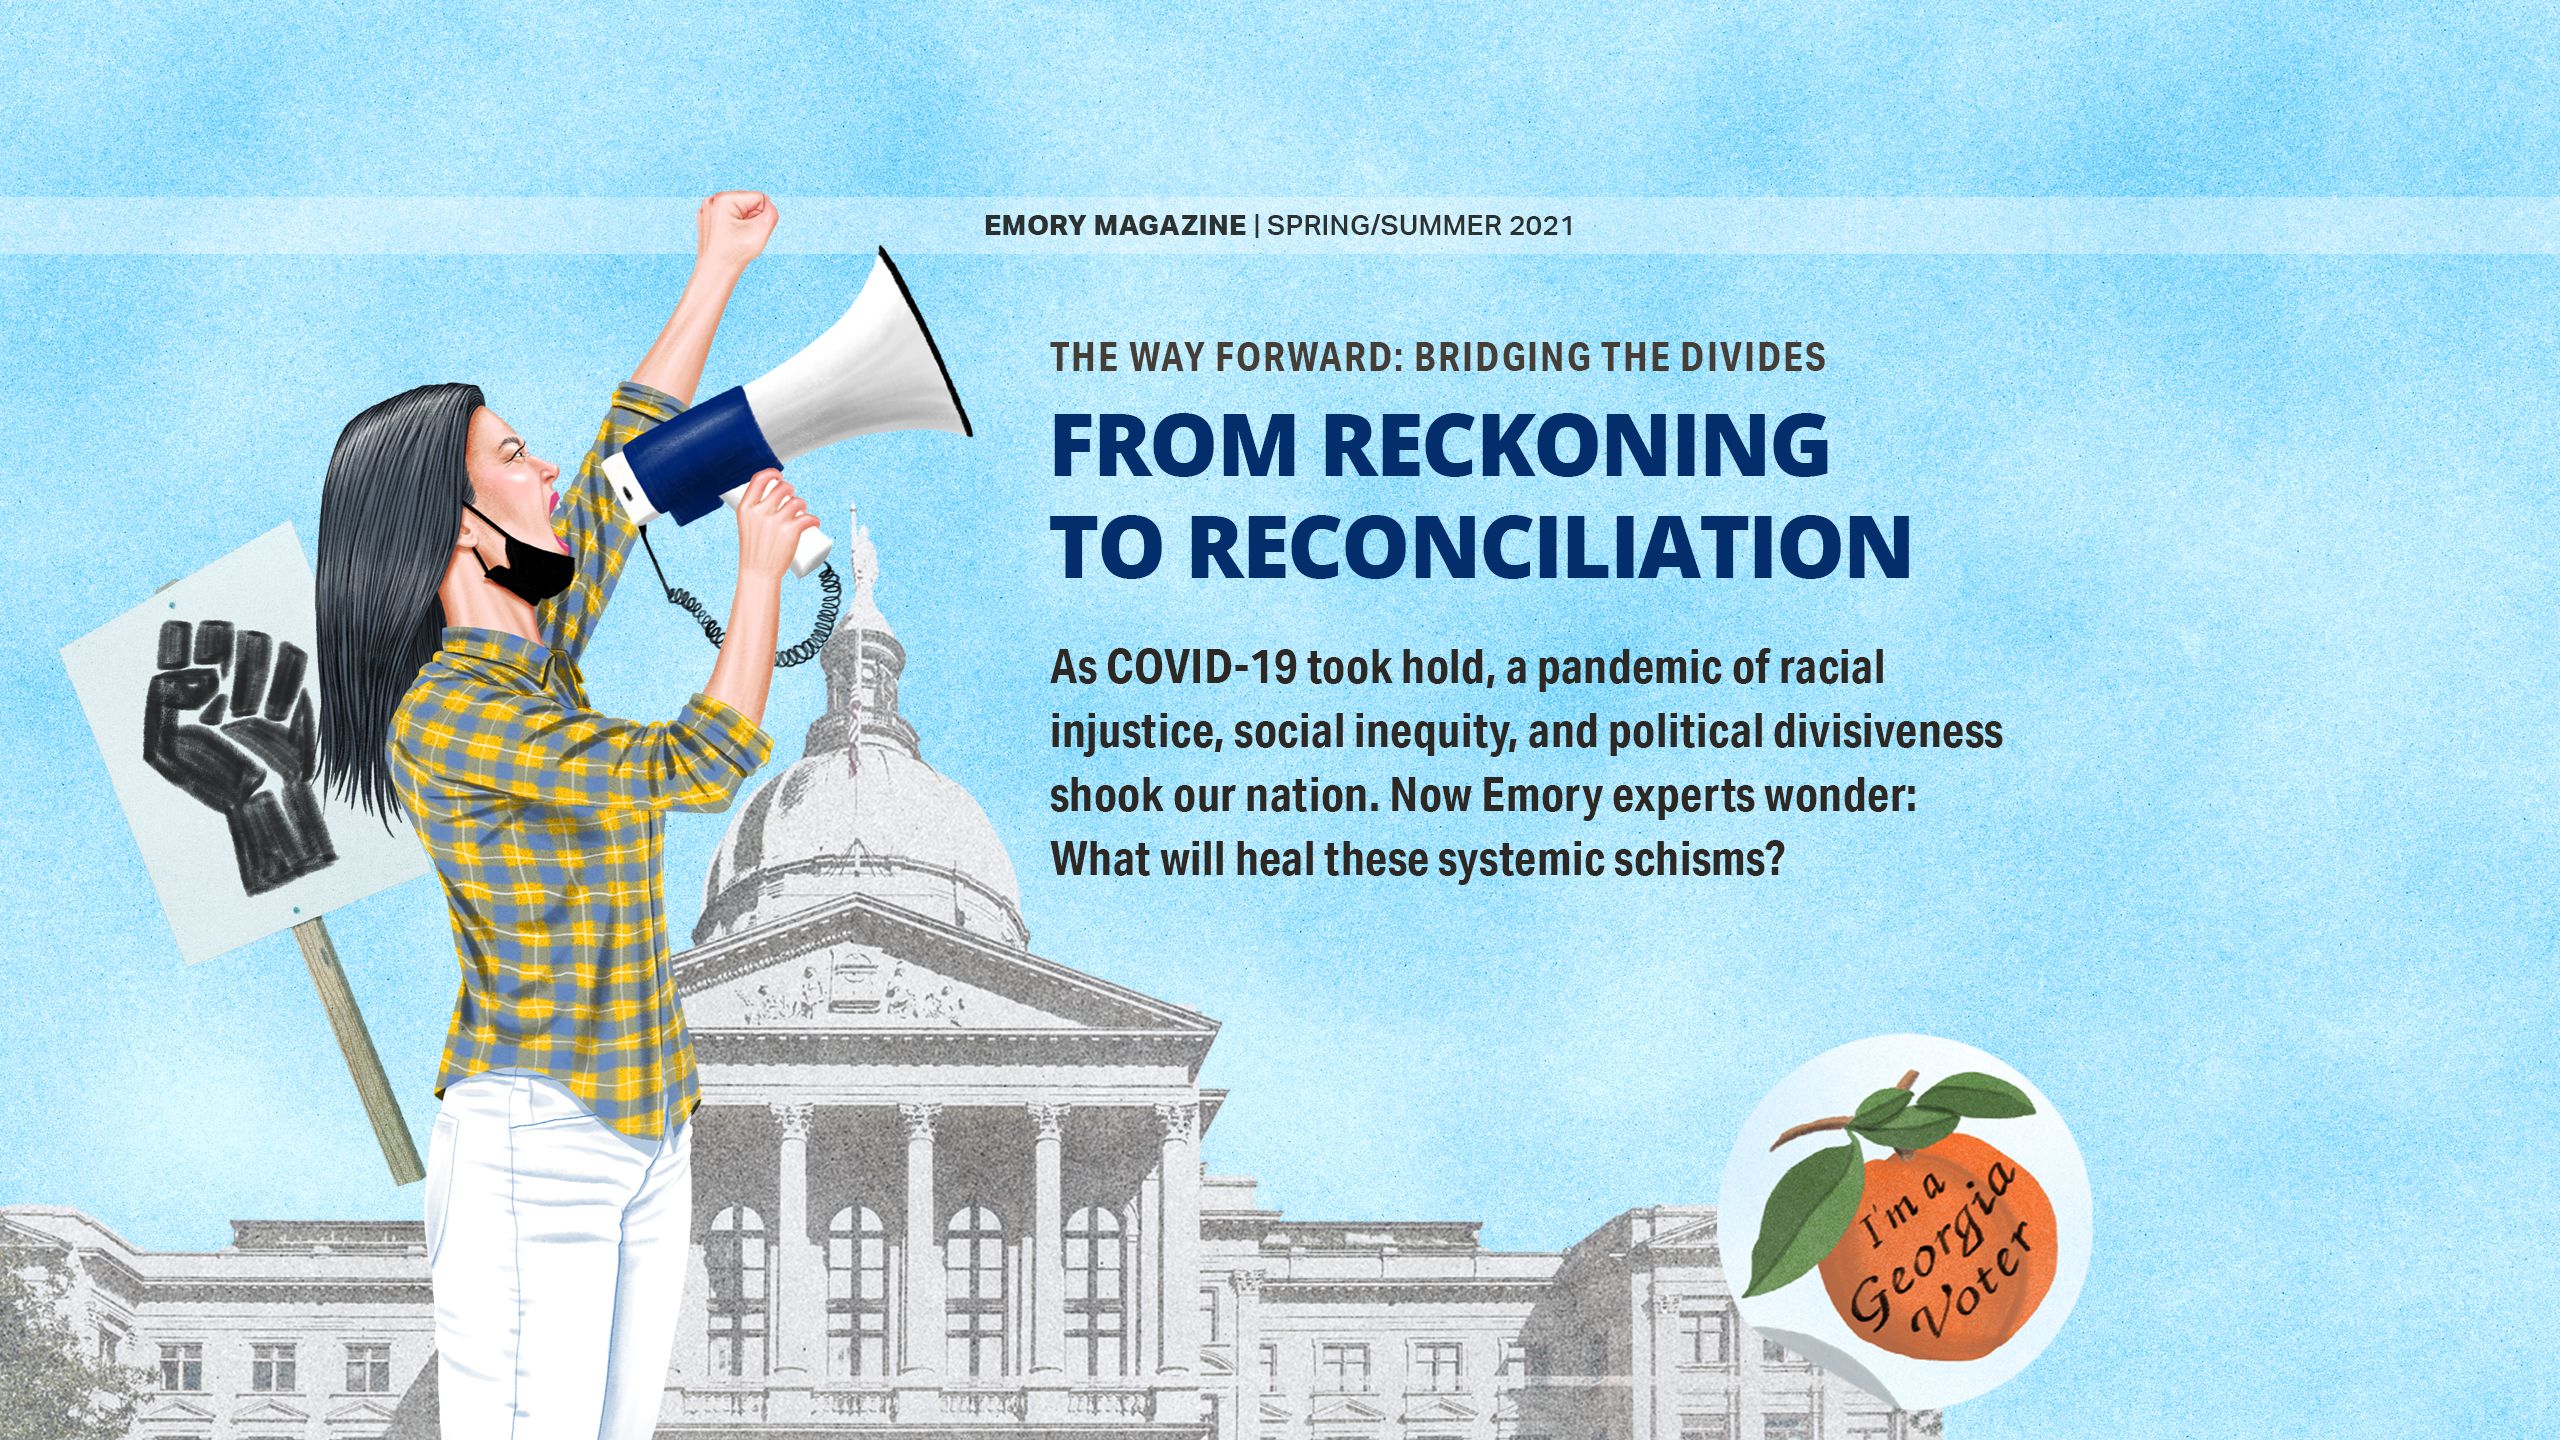 FROM RECKONING TO RECONCILATION As COVID-19 took hold, a pandemic of racial injustice, social inequity, and political divisiveness shook our nation. Now Emory experts wonder: What will heal these systemic schisms?